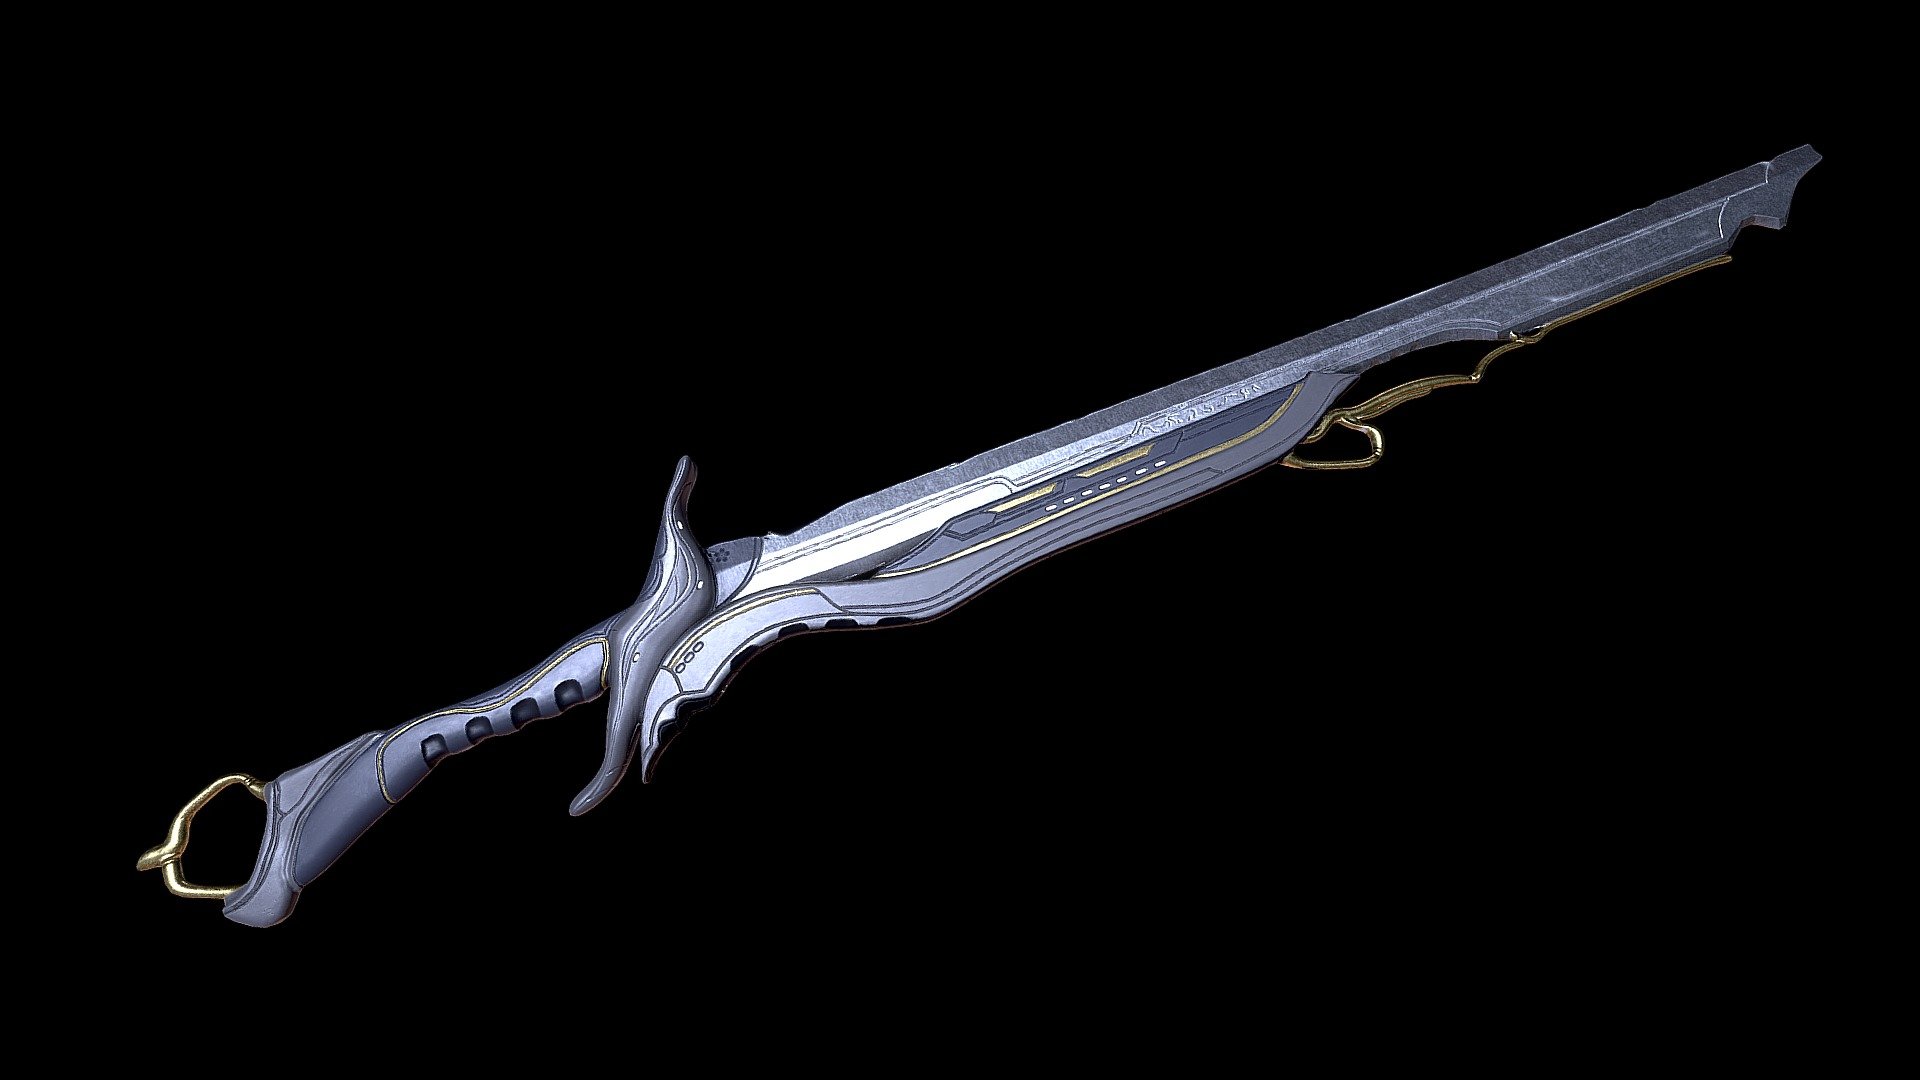 warframe style sword. completly free. made with blender,zbrush and substance painter
here my referance https://twitter.com/lukinu_u/status/1255952099663327235 3d model